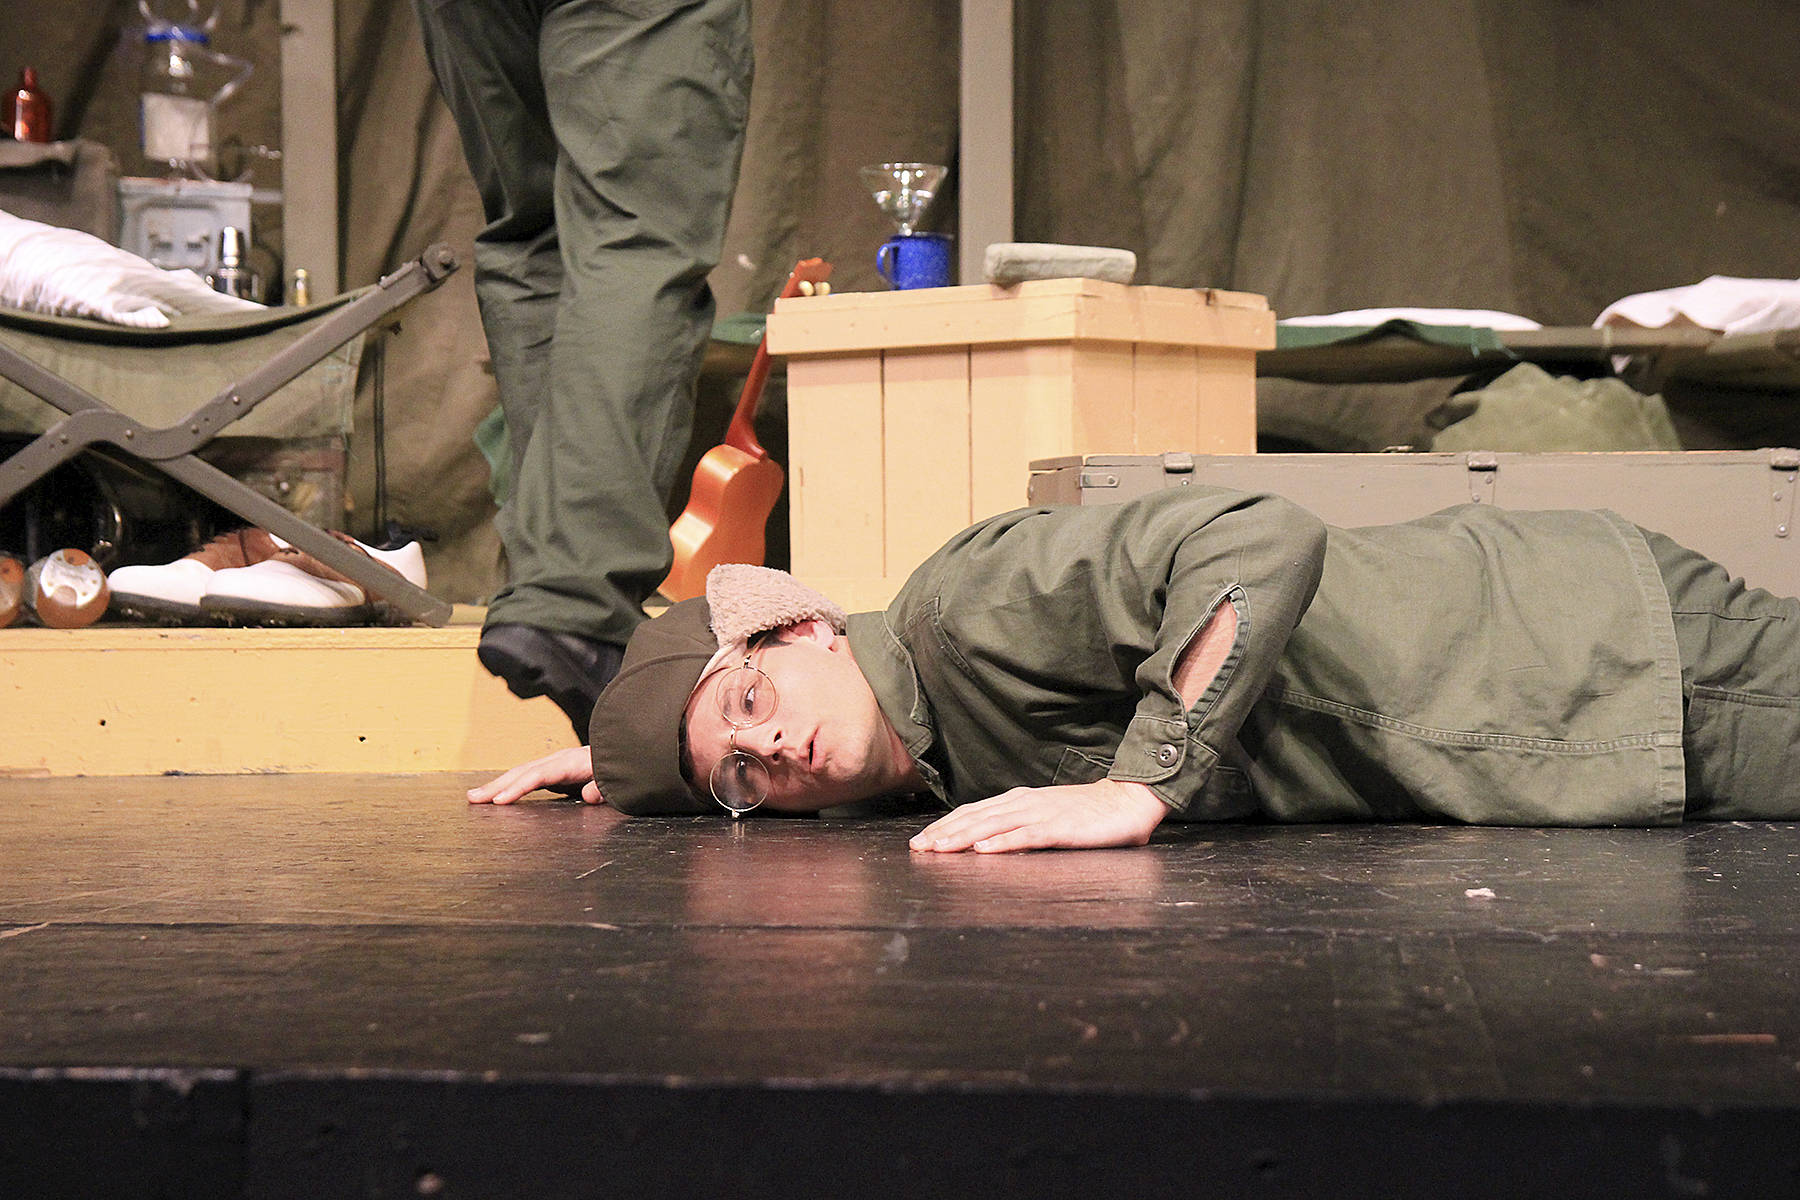 Walter “Radar” Reilly, played by Connor Magnoli, uses his special gift to listen across great distances. Photos by Laura Guido/Whidbey News-Times